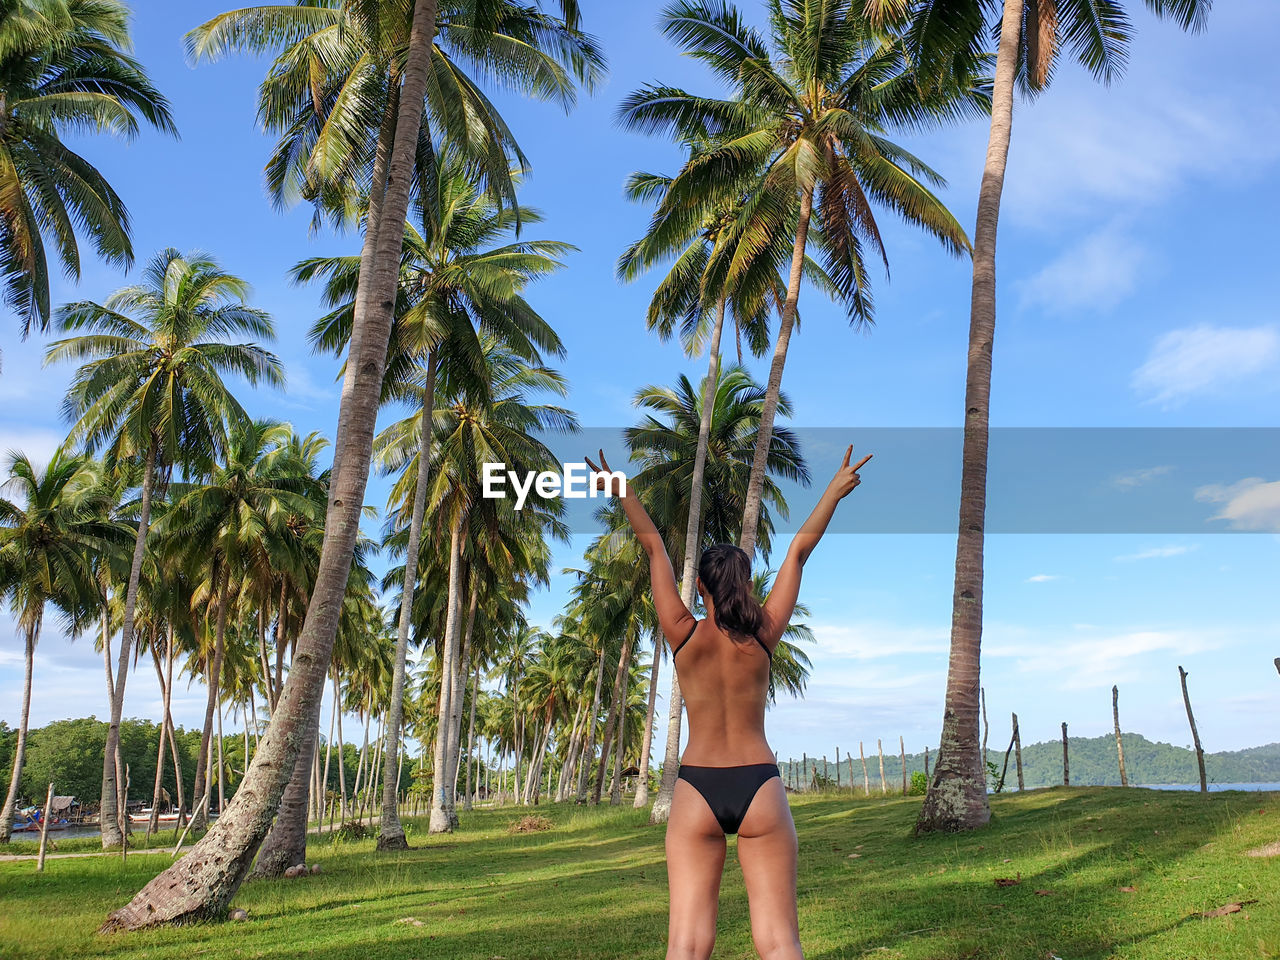 LOW ANGLE VIEW OF WOMAN STANDING ON PALM TREE